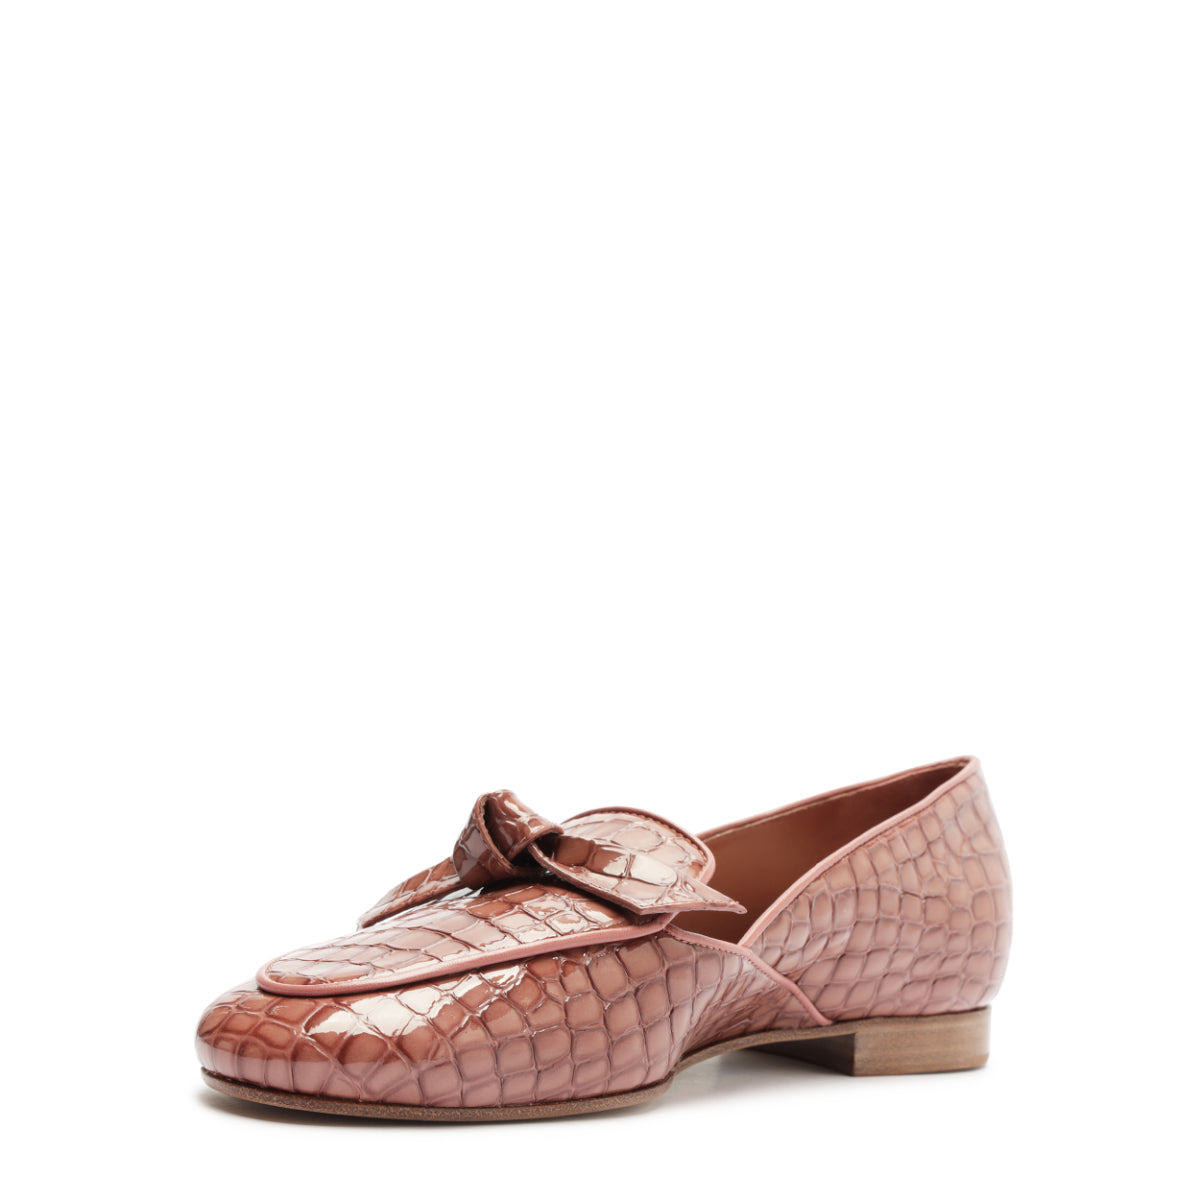 Clarita Belgian Crocco Loafer in Clay